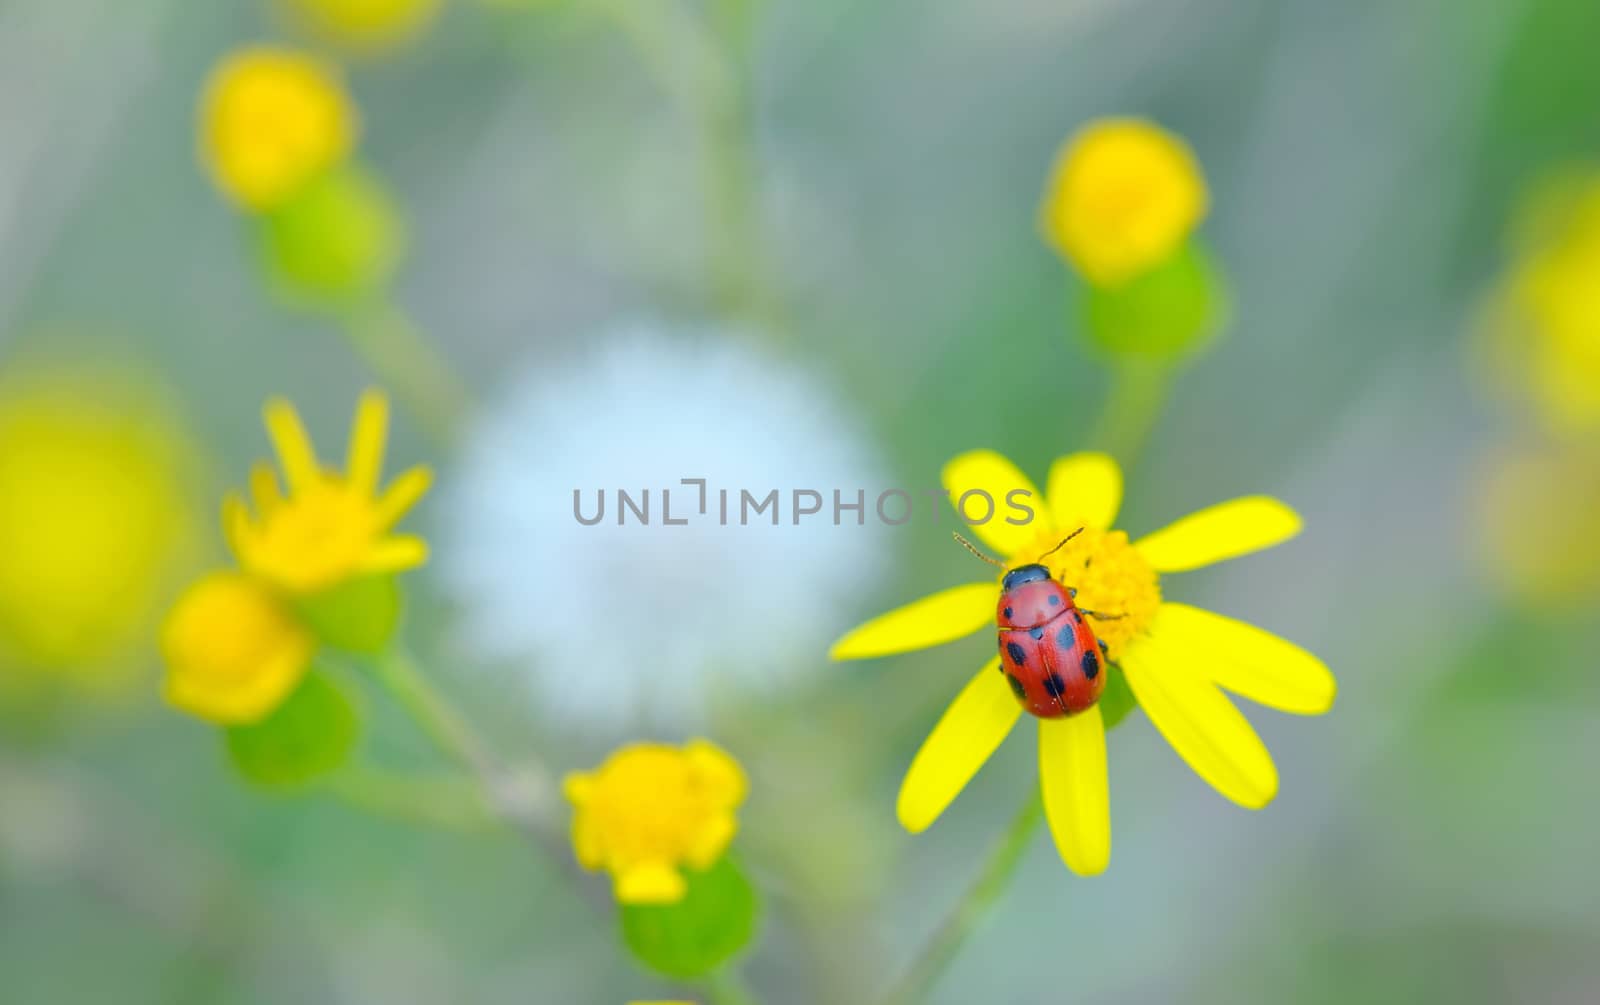 Ladybug on yellow flower in spring time